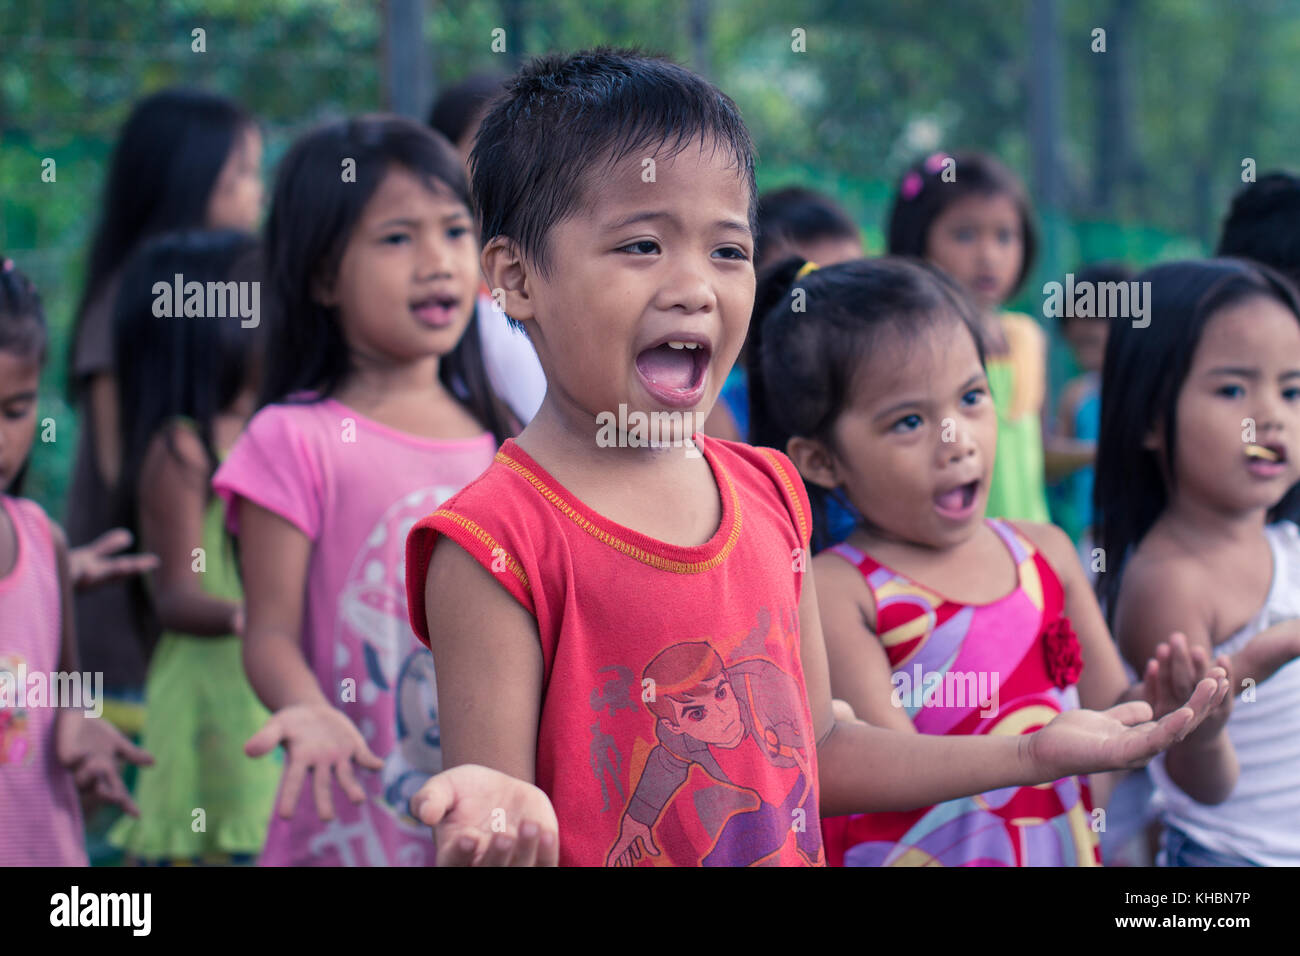 Children worships at a charity program in the slum. Poor children finding hope in their faith. Stock Photo